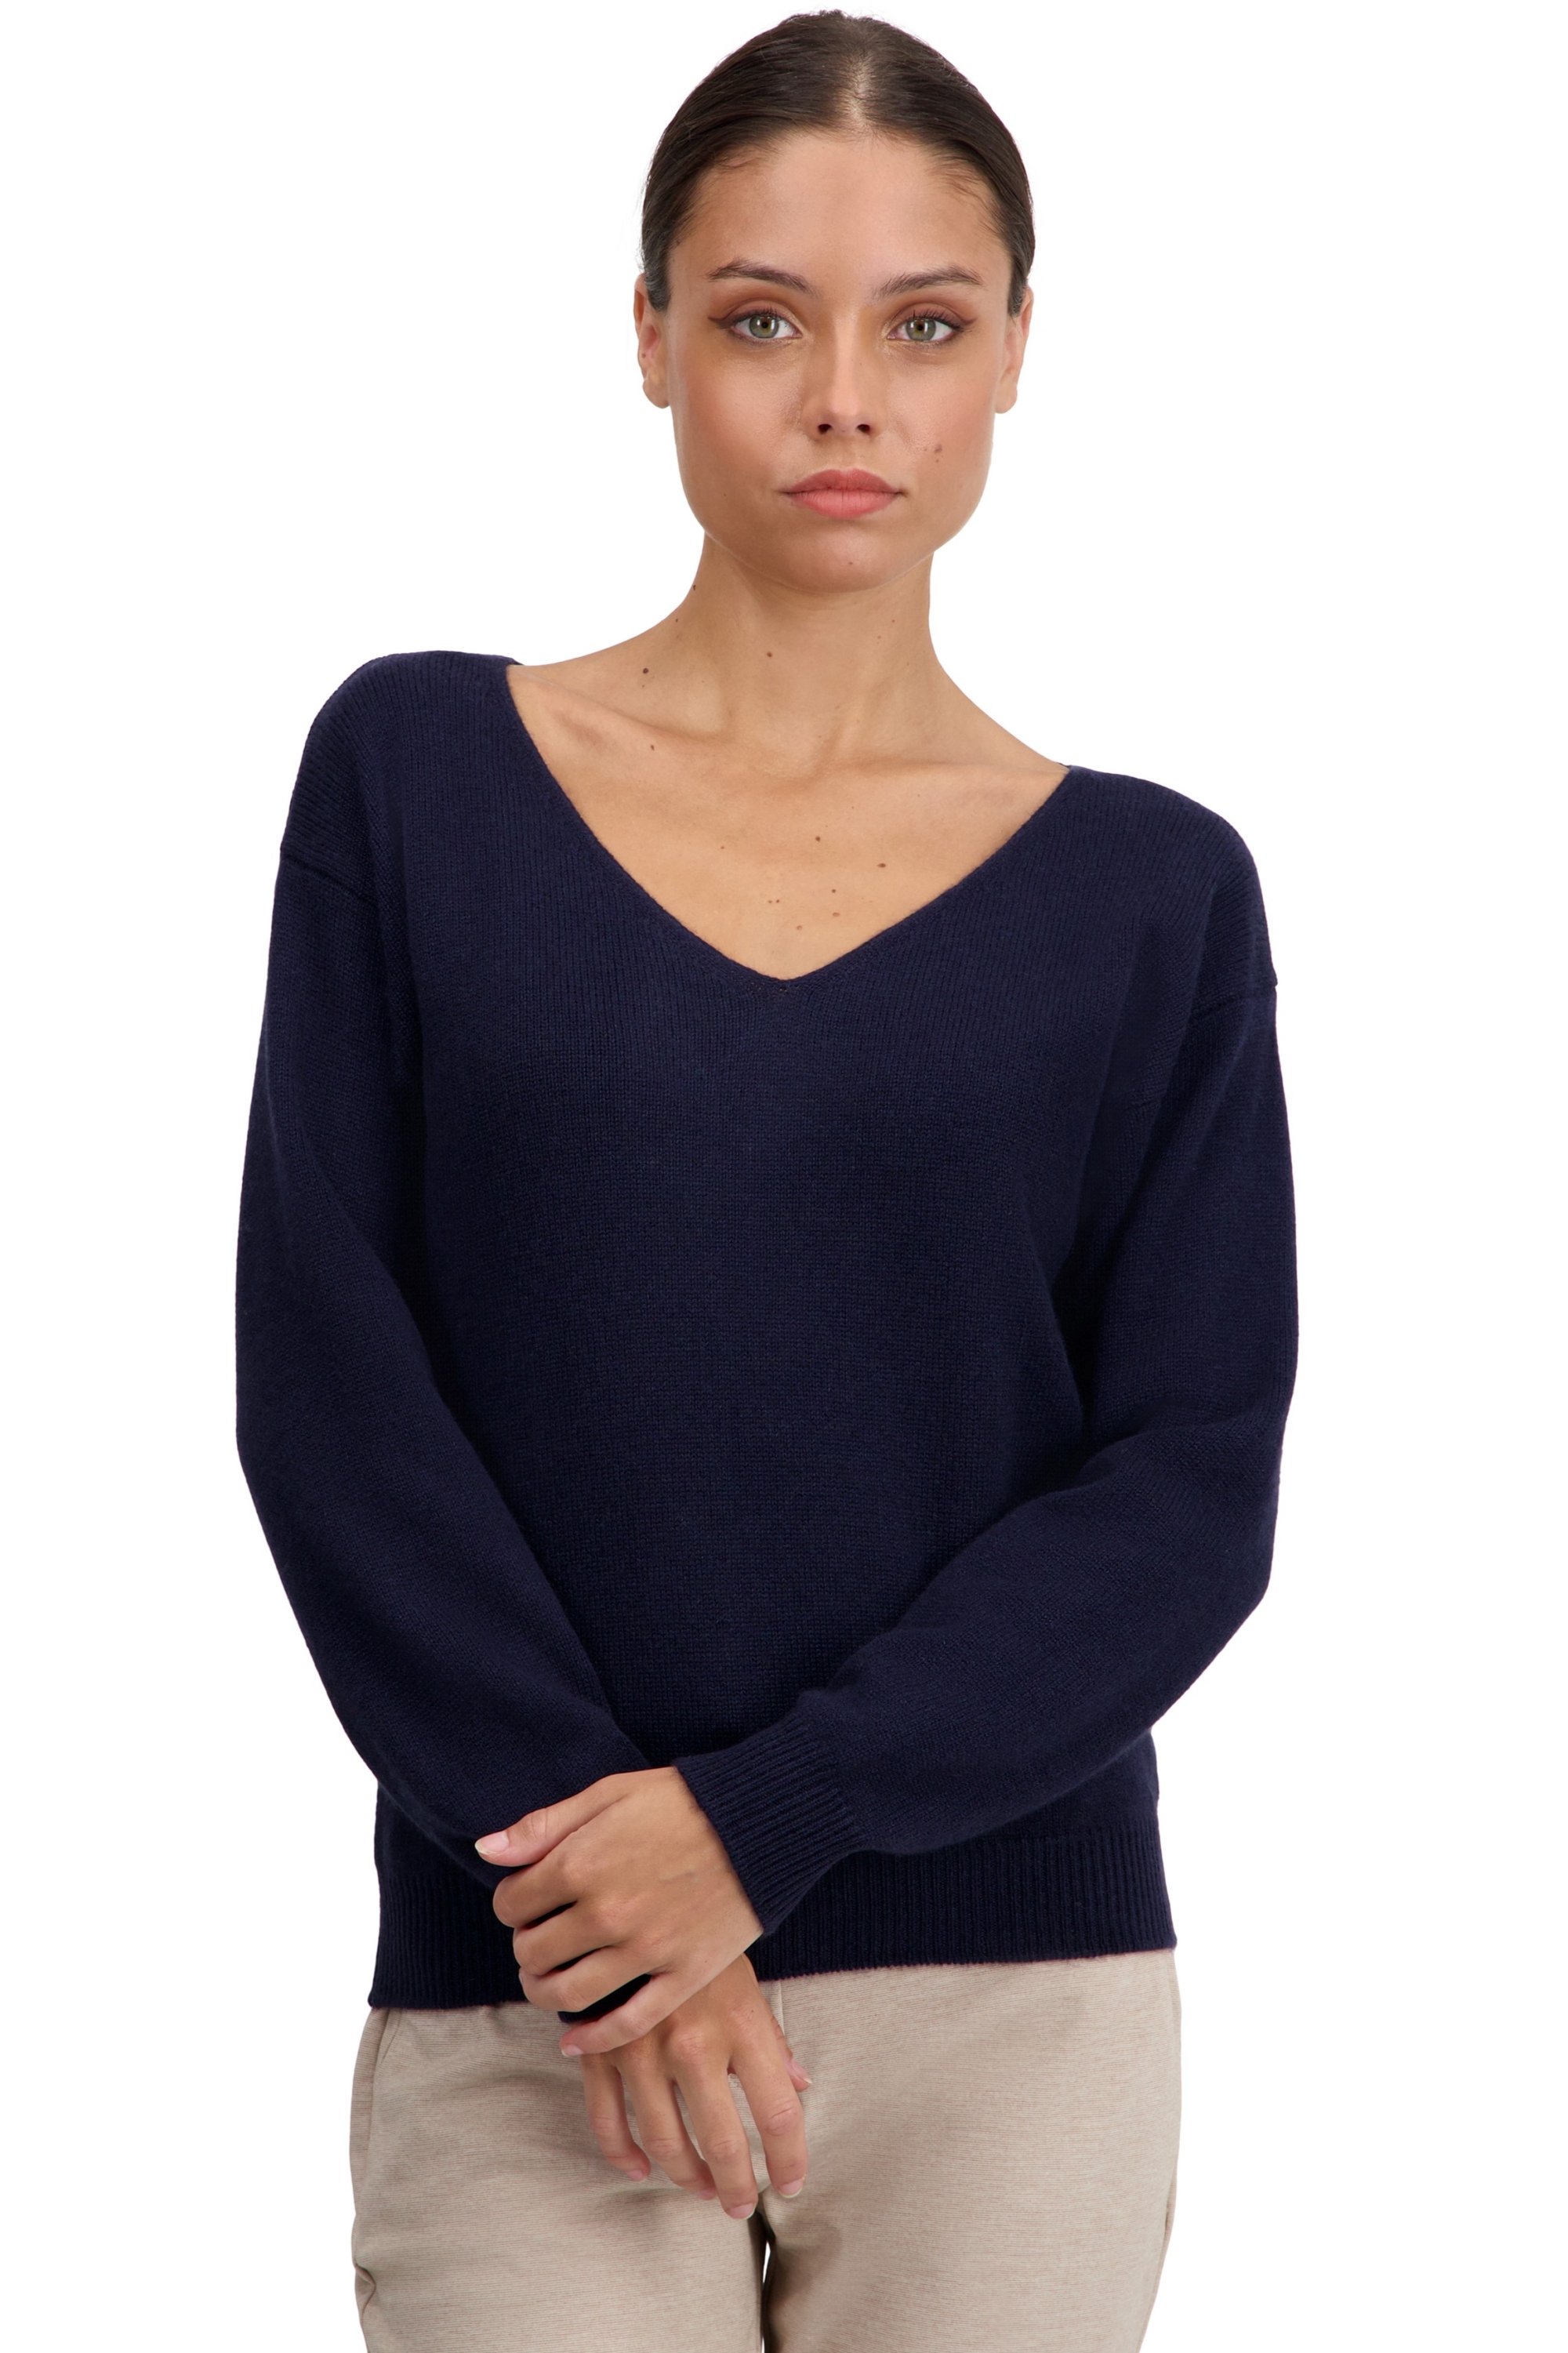 Cashmere ladies chunky sweater thailand dress blue s